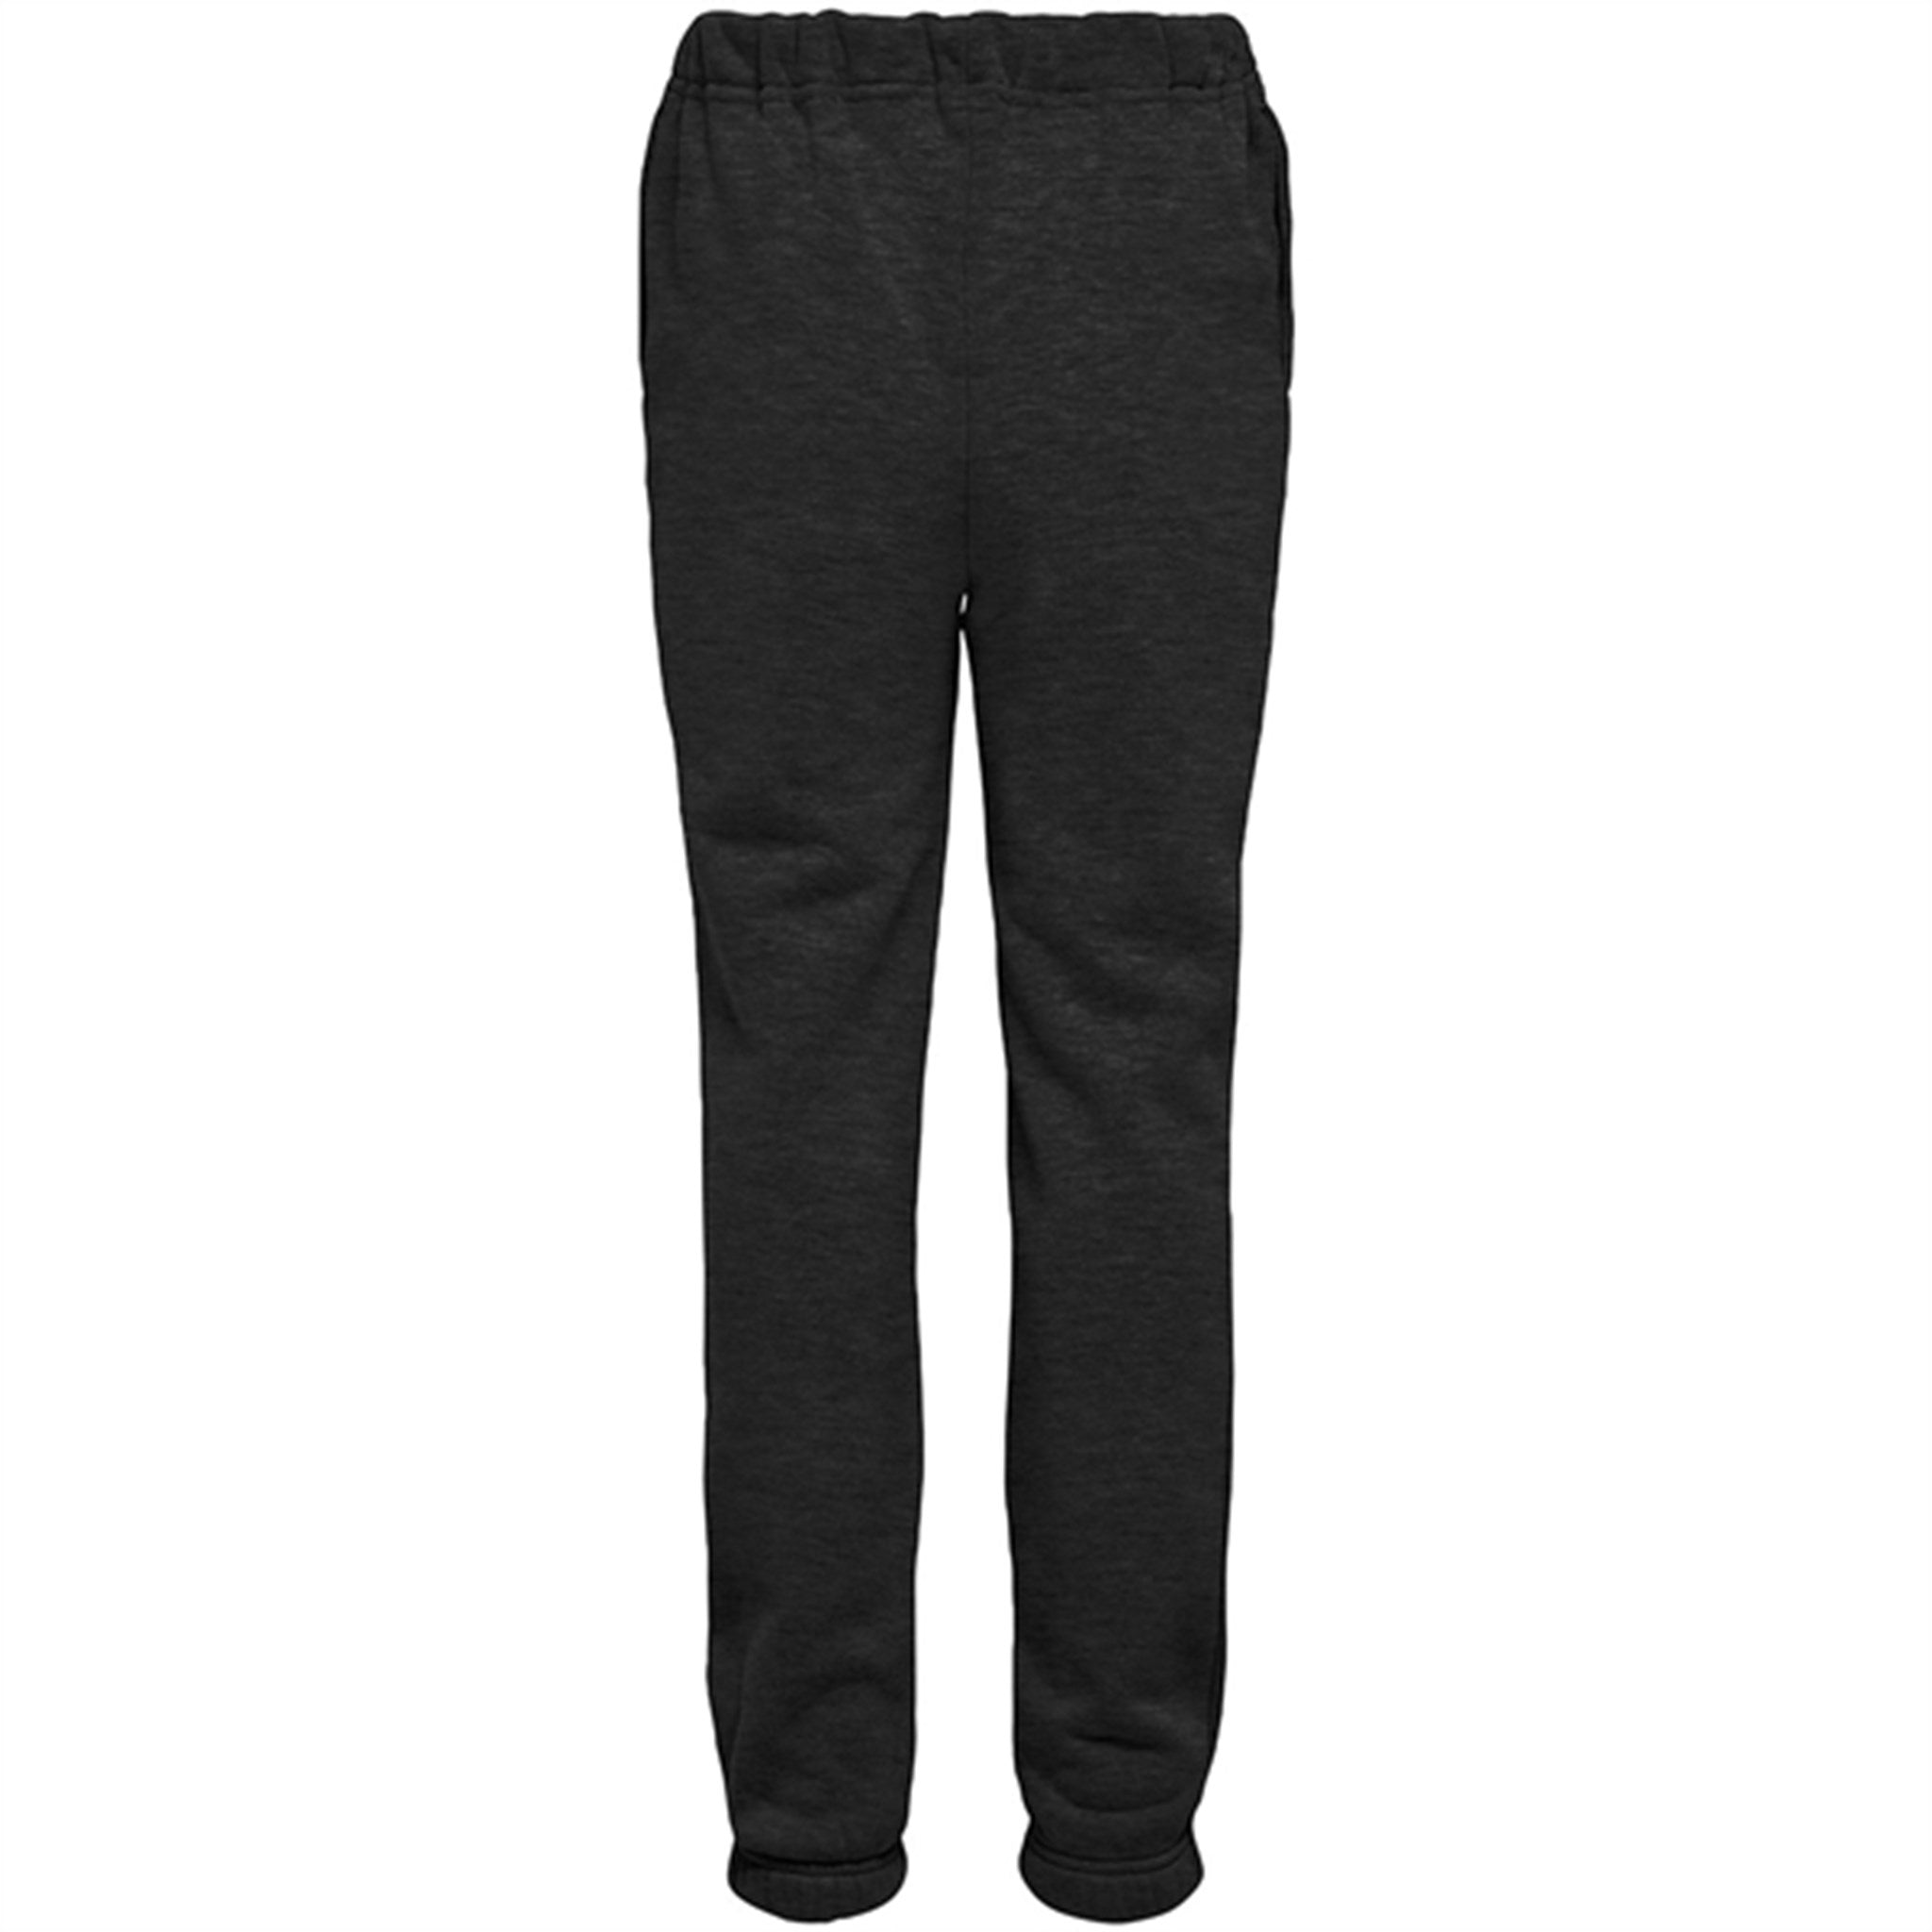 Kids ONLY Black Never MW Pull-Up Pants 2